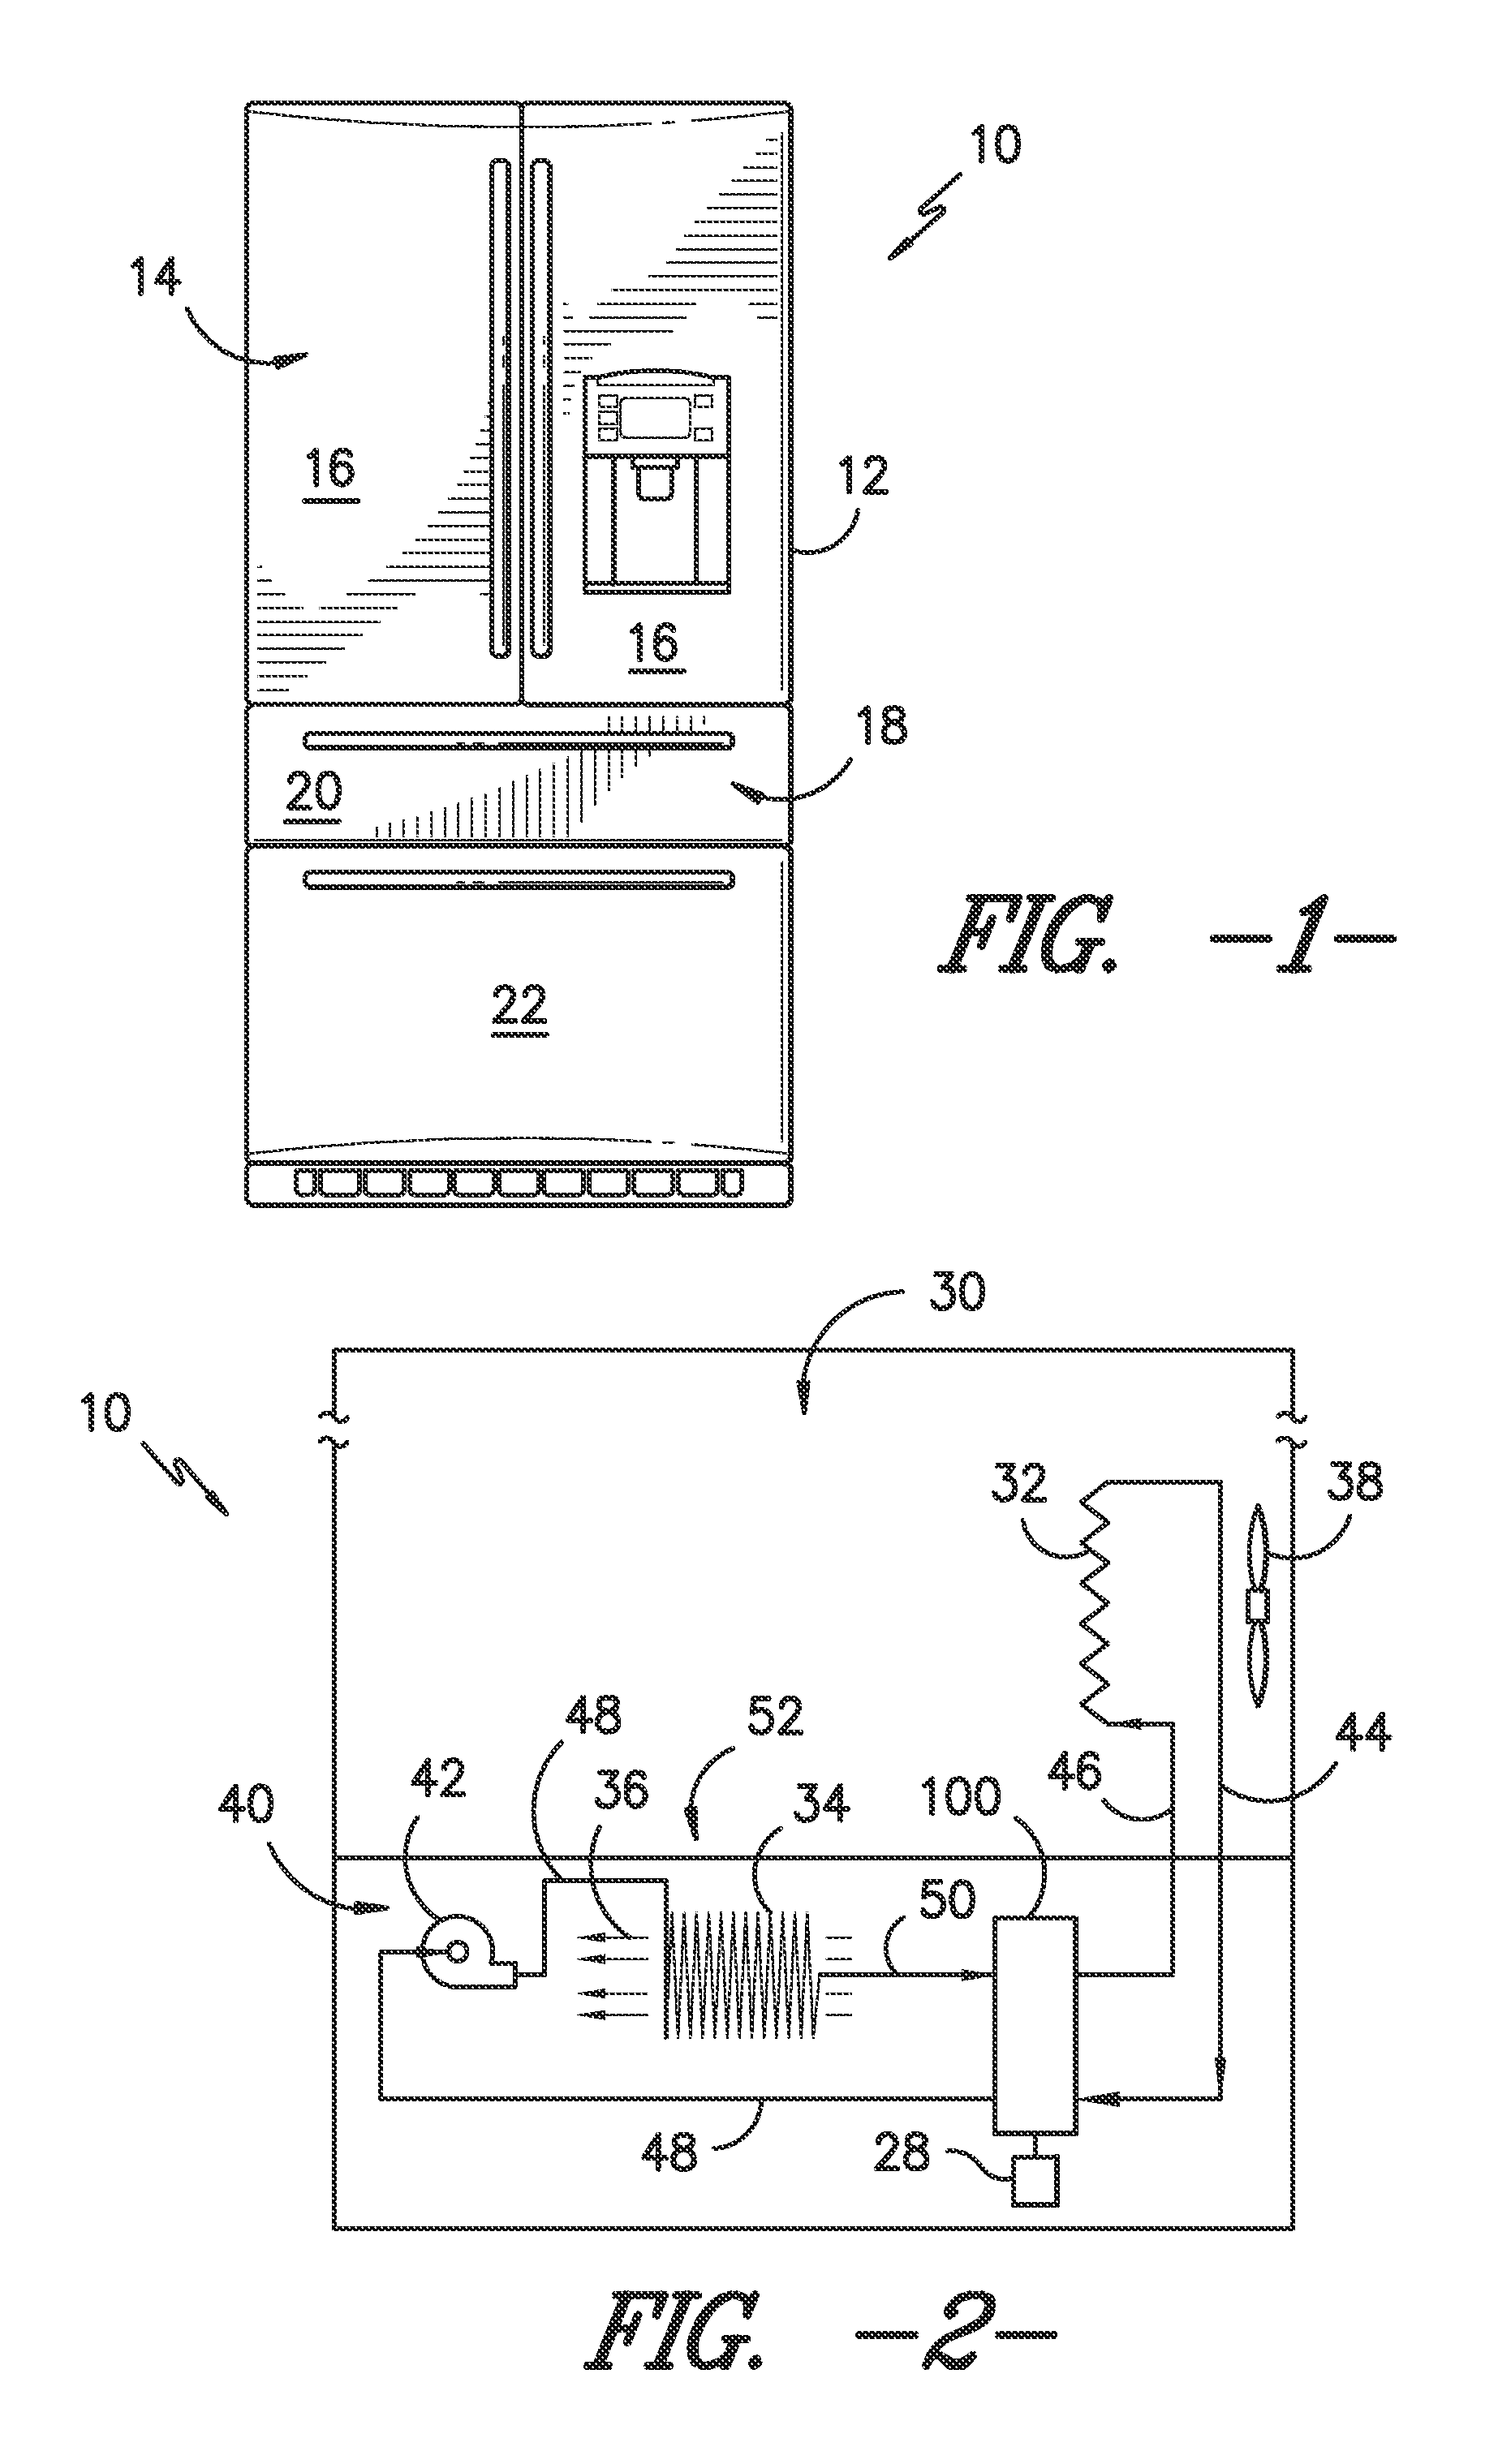 Heat pump with magneto caloric materials and variable magnetic field strength